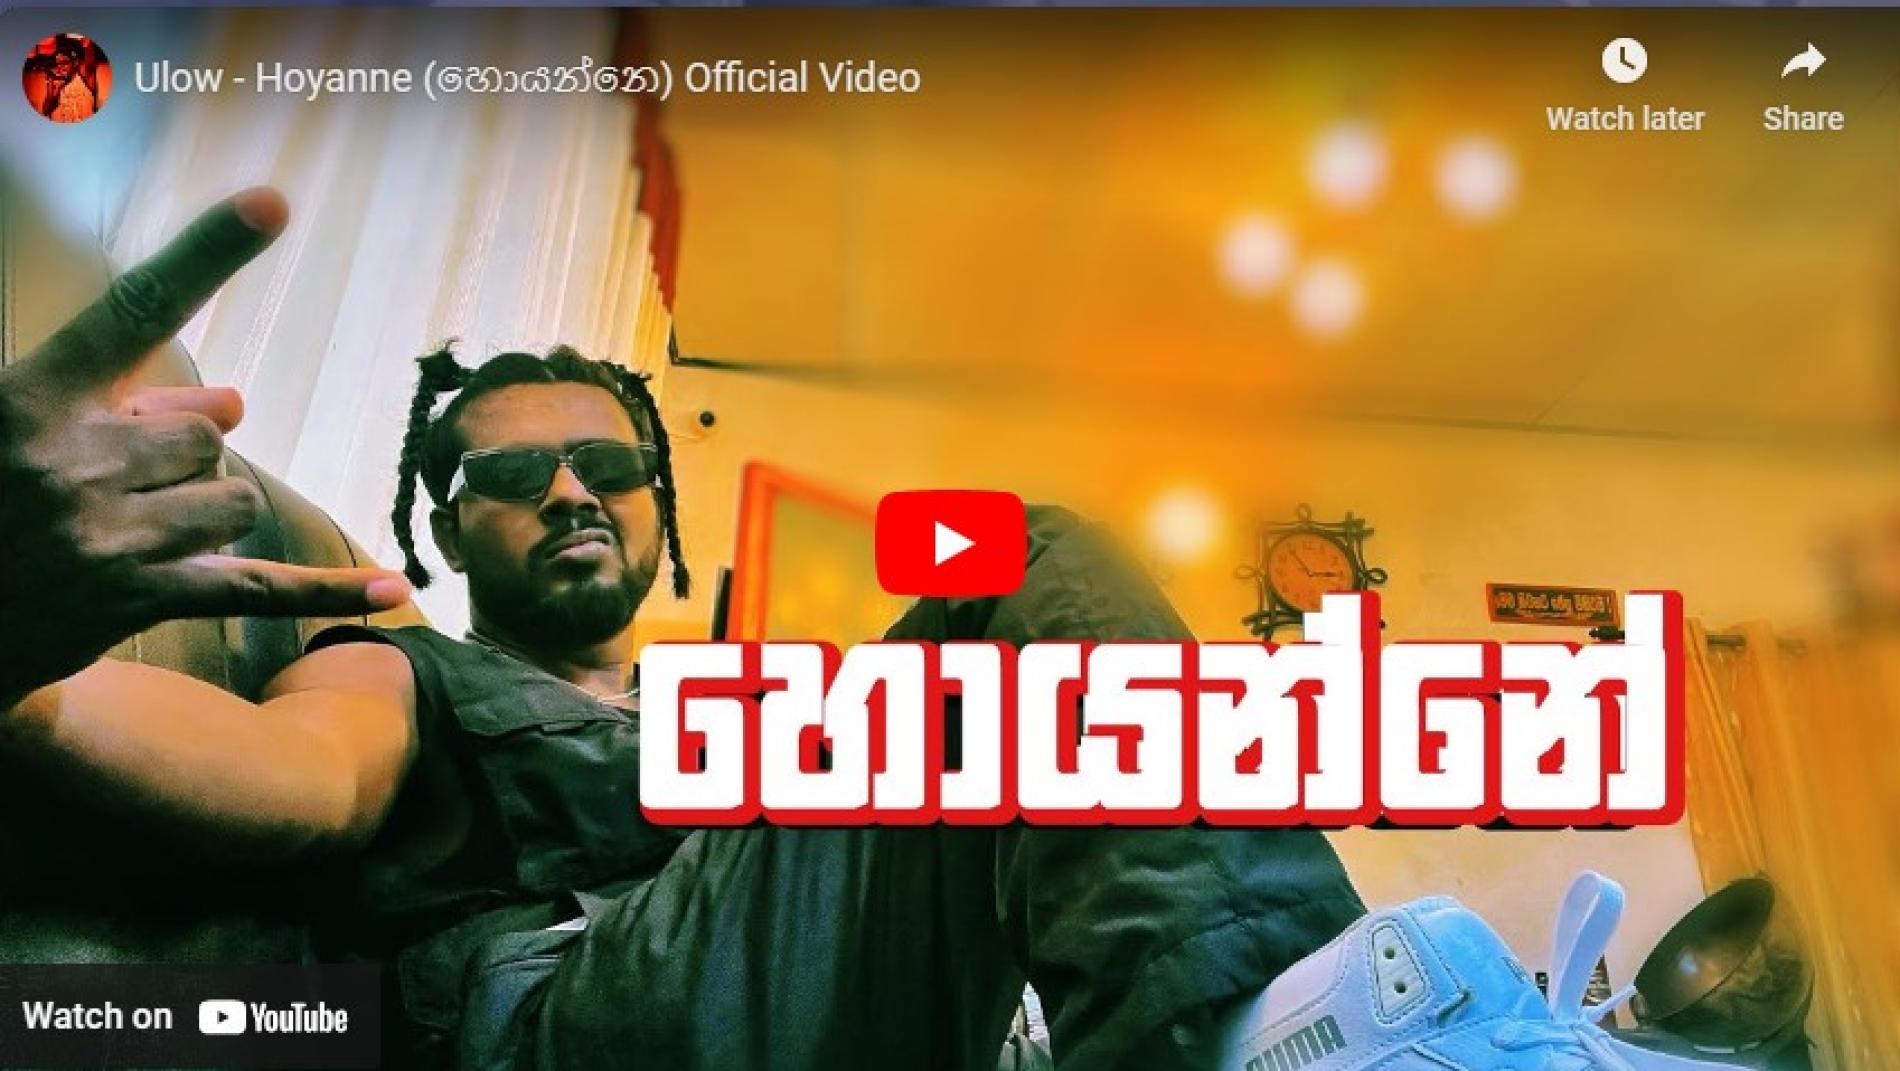 New Music : Ulow – Hoyanne (හොයන්නෙ) Official Video